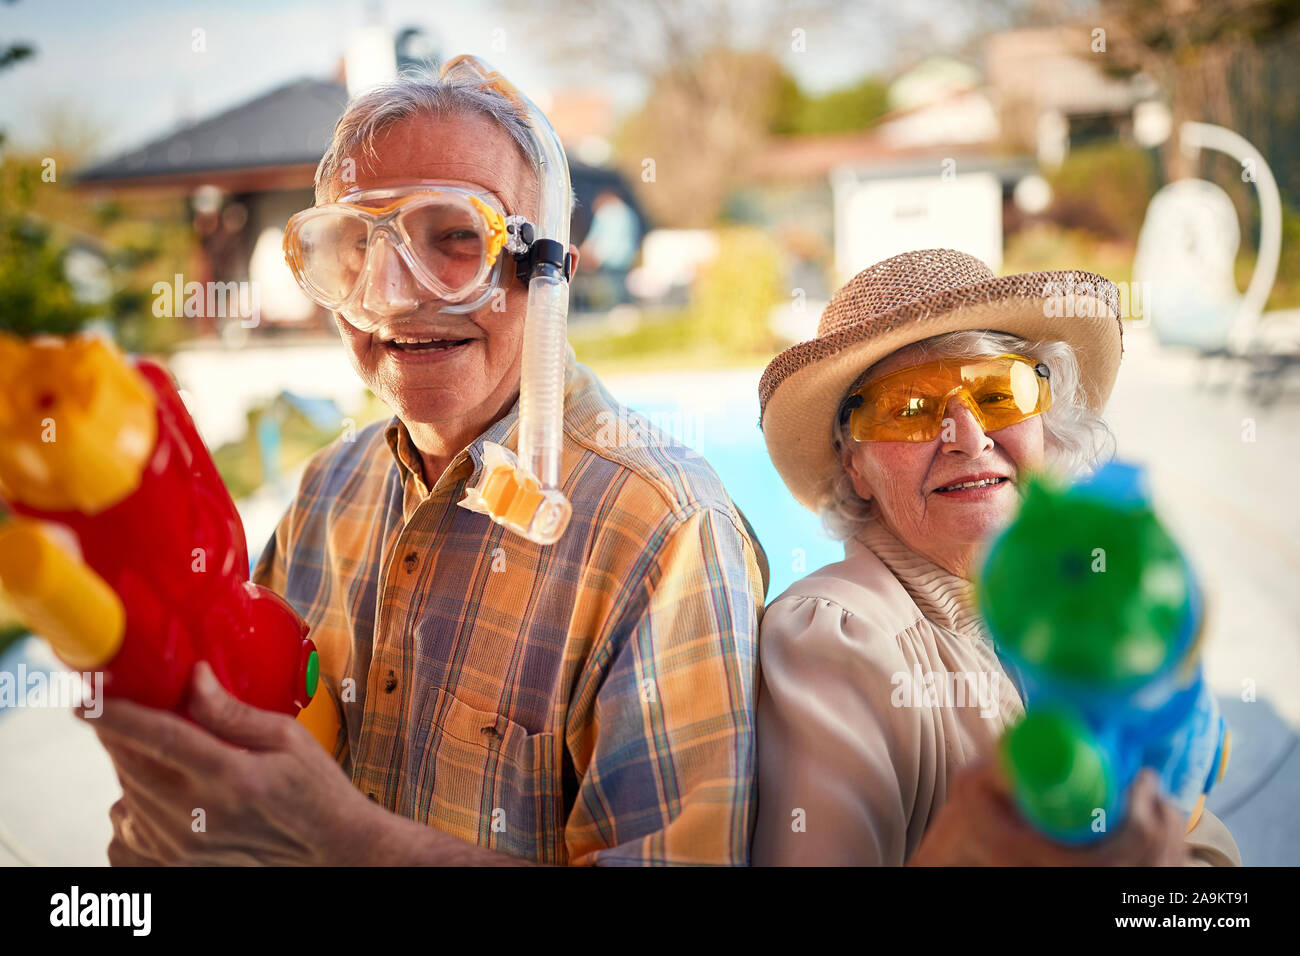 Senior crazy man and woman have fun playing with  water gun. Stock Photo